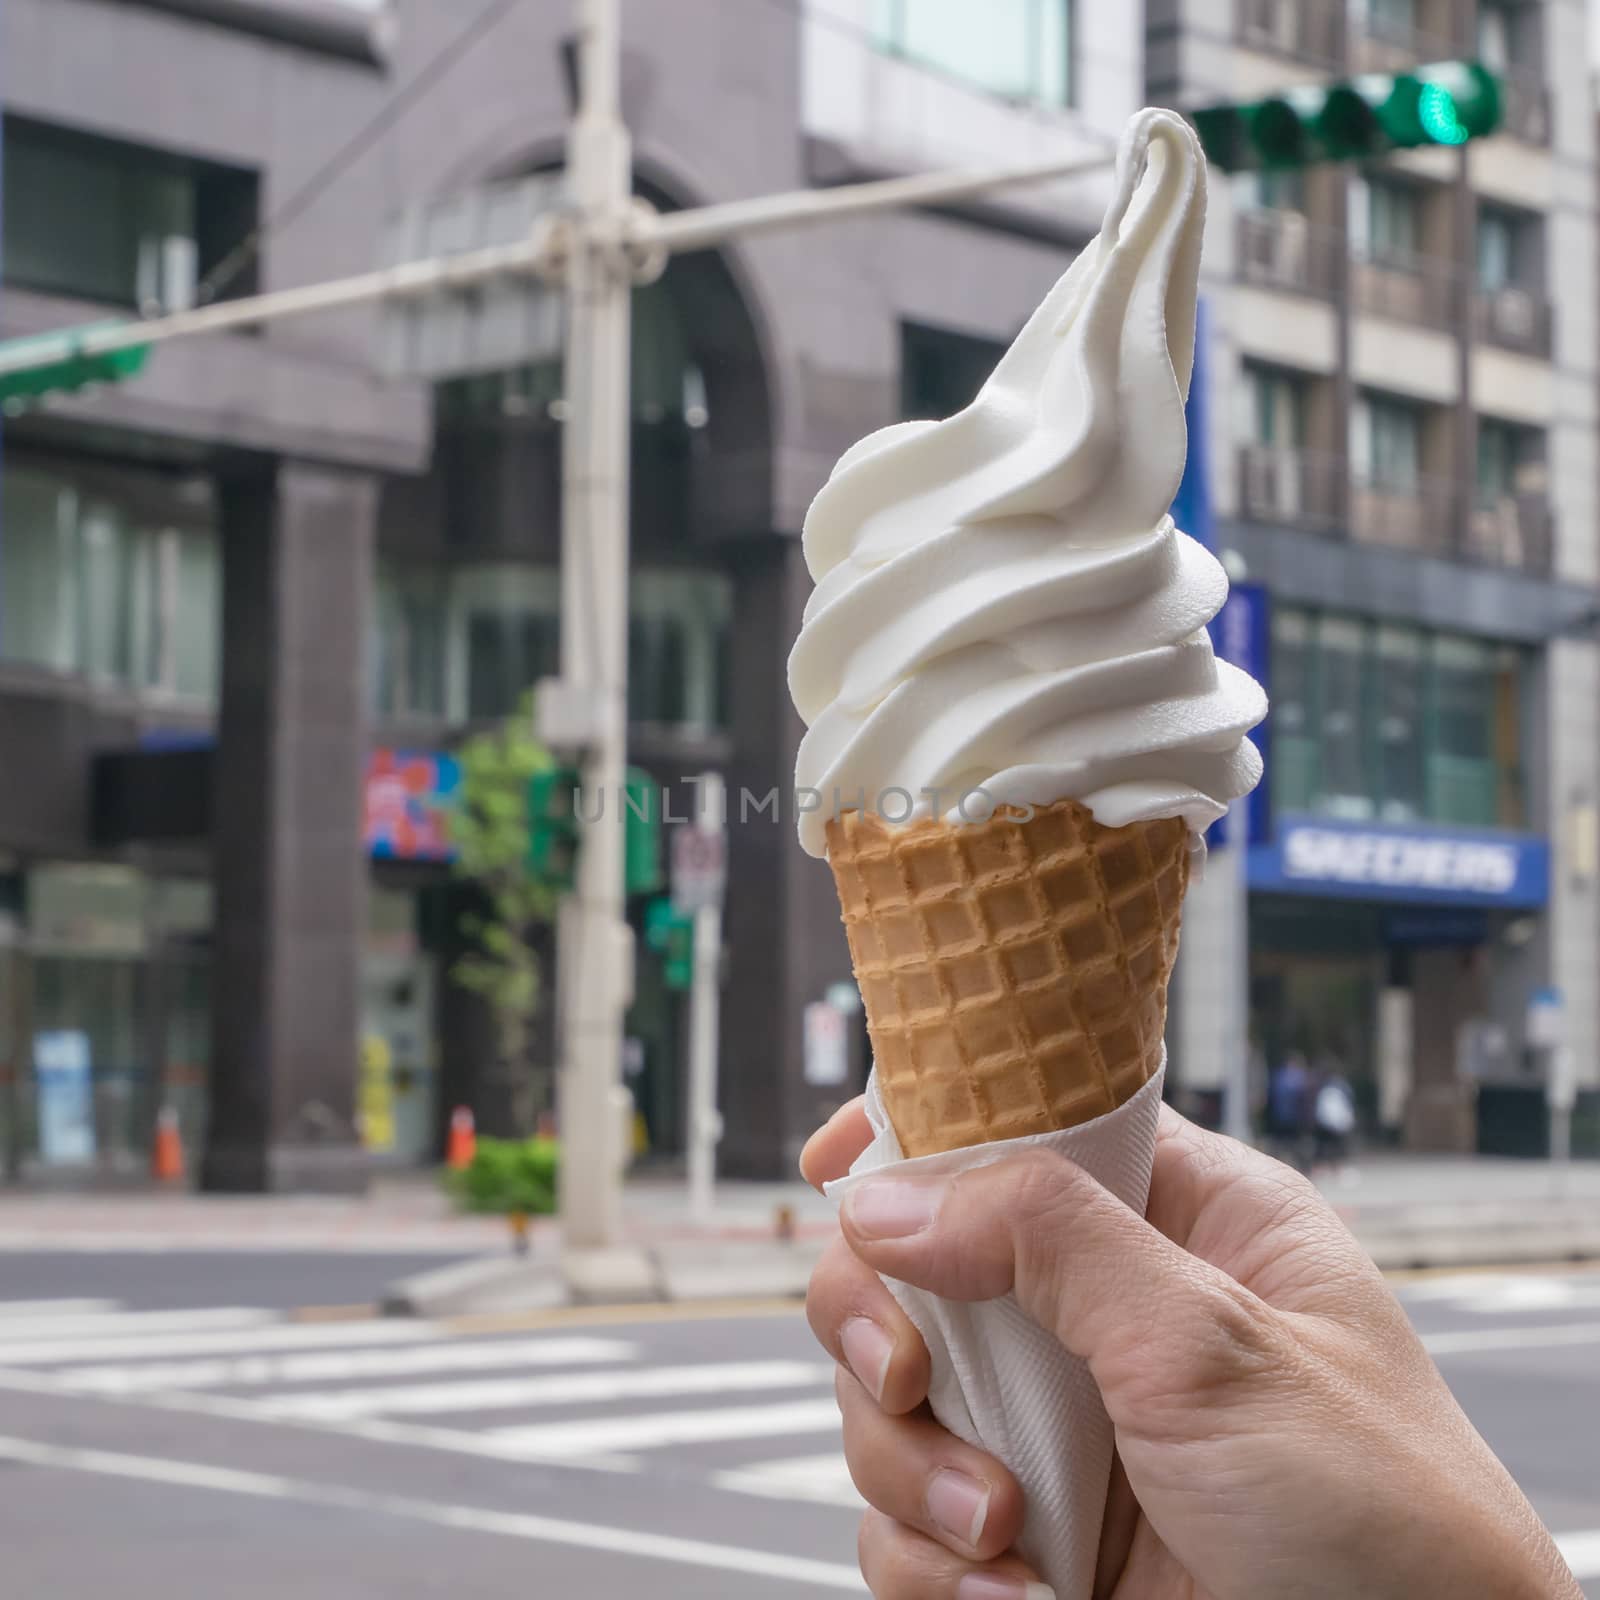 The delicious ice cream cone on hand at street in Taipei city, Taiwan.